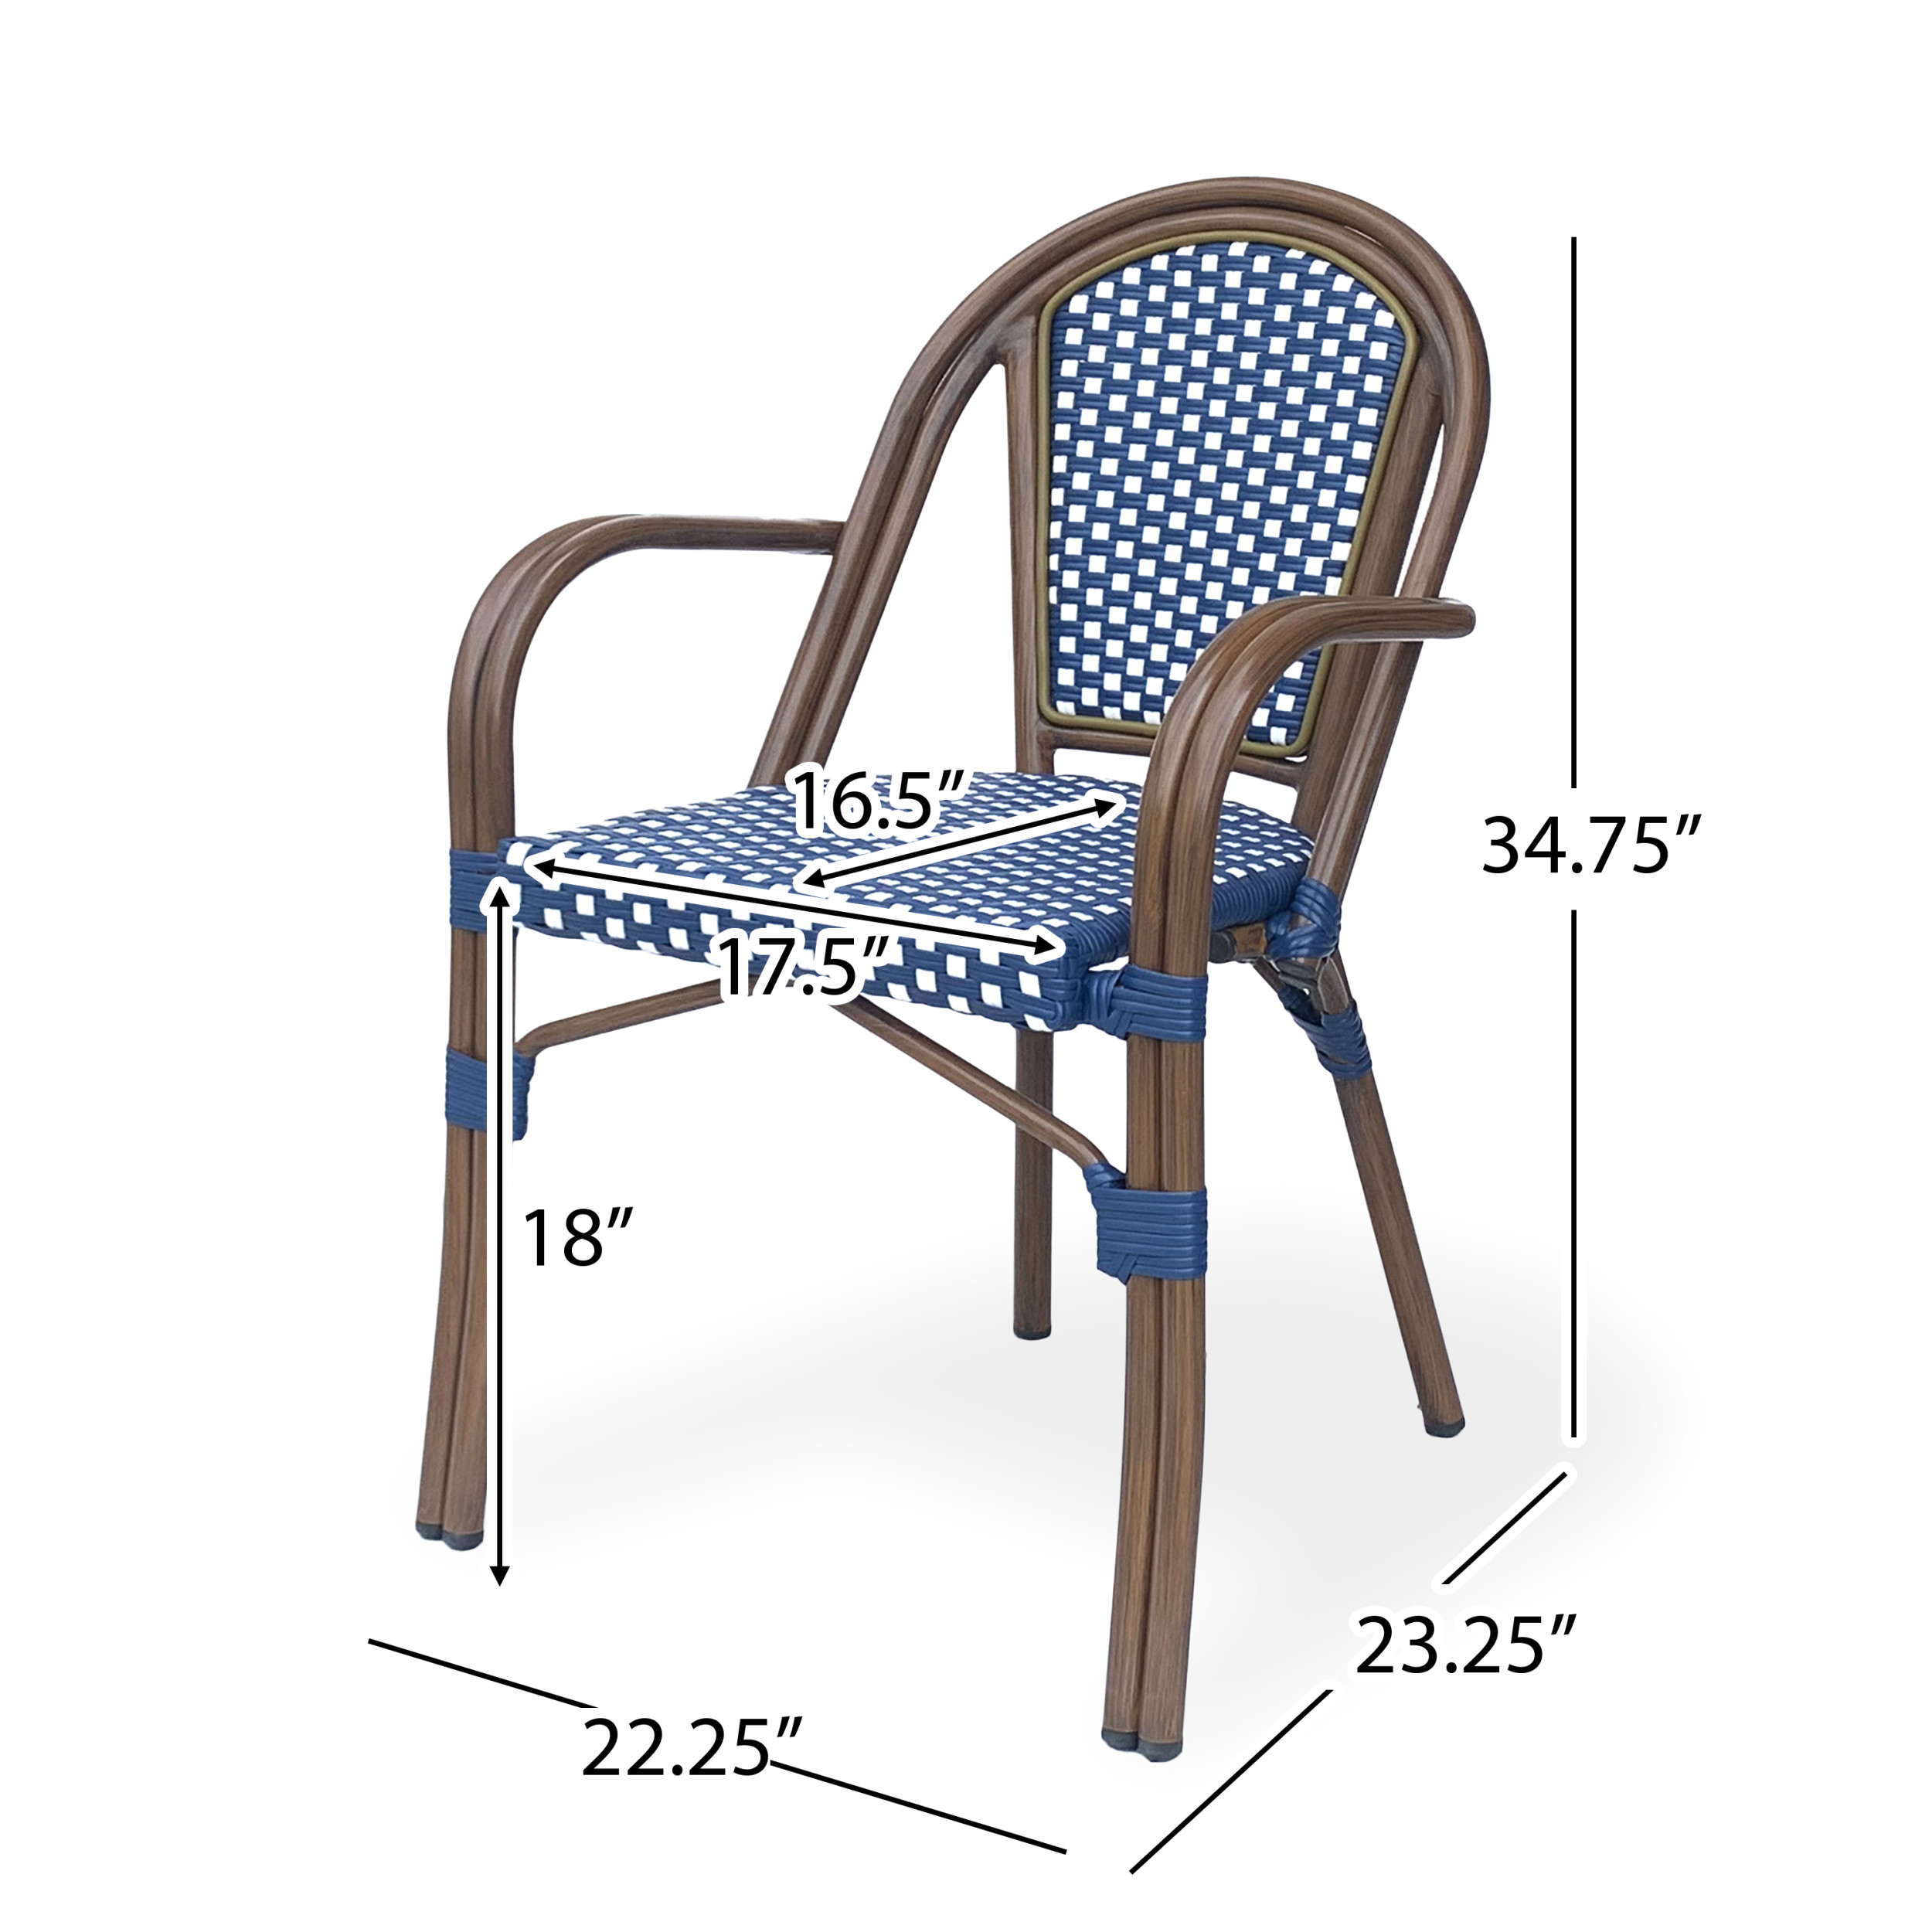 Cecil Aluminum and Wicker Outdoor French Bistro Chairs, Set of 4, Navy Blue, White, and Brown Wood - image 3 of 7